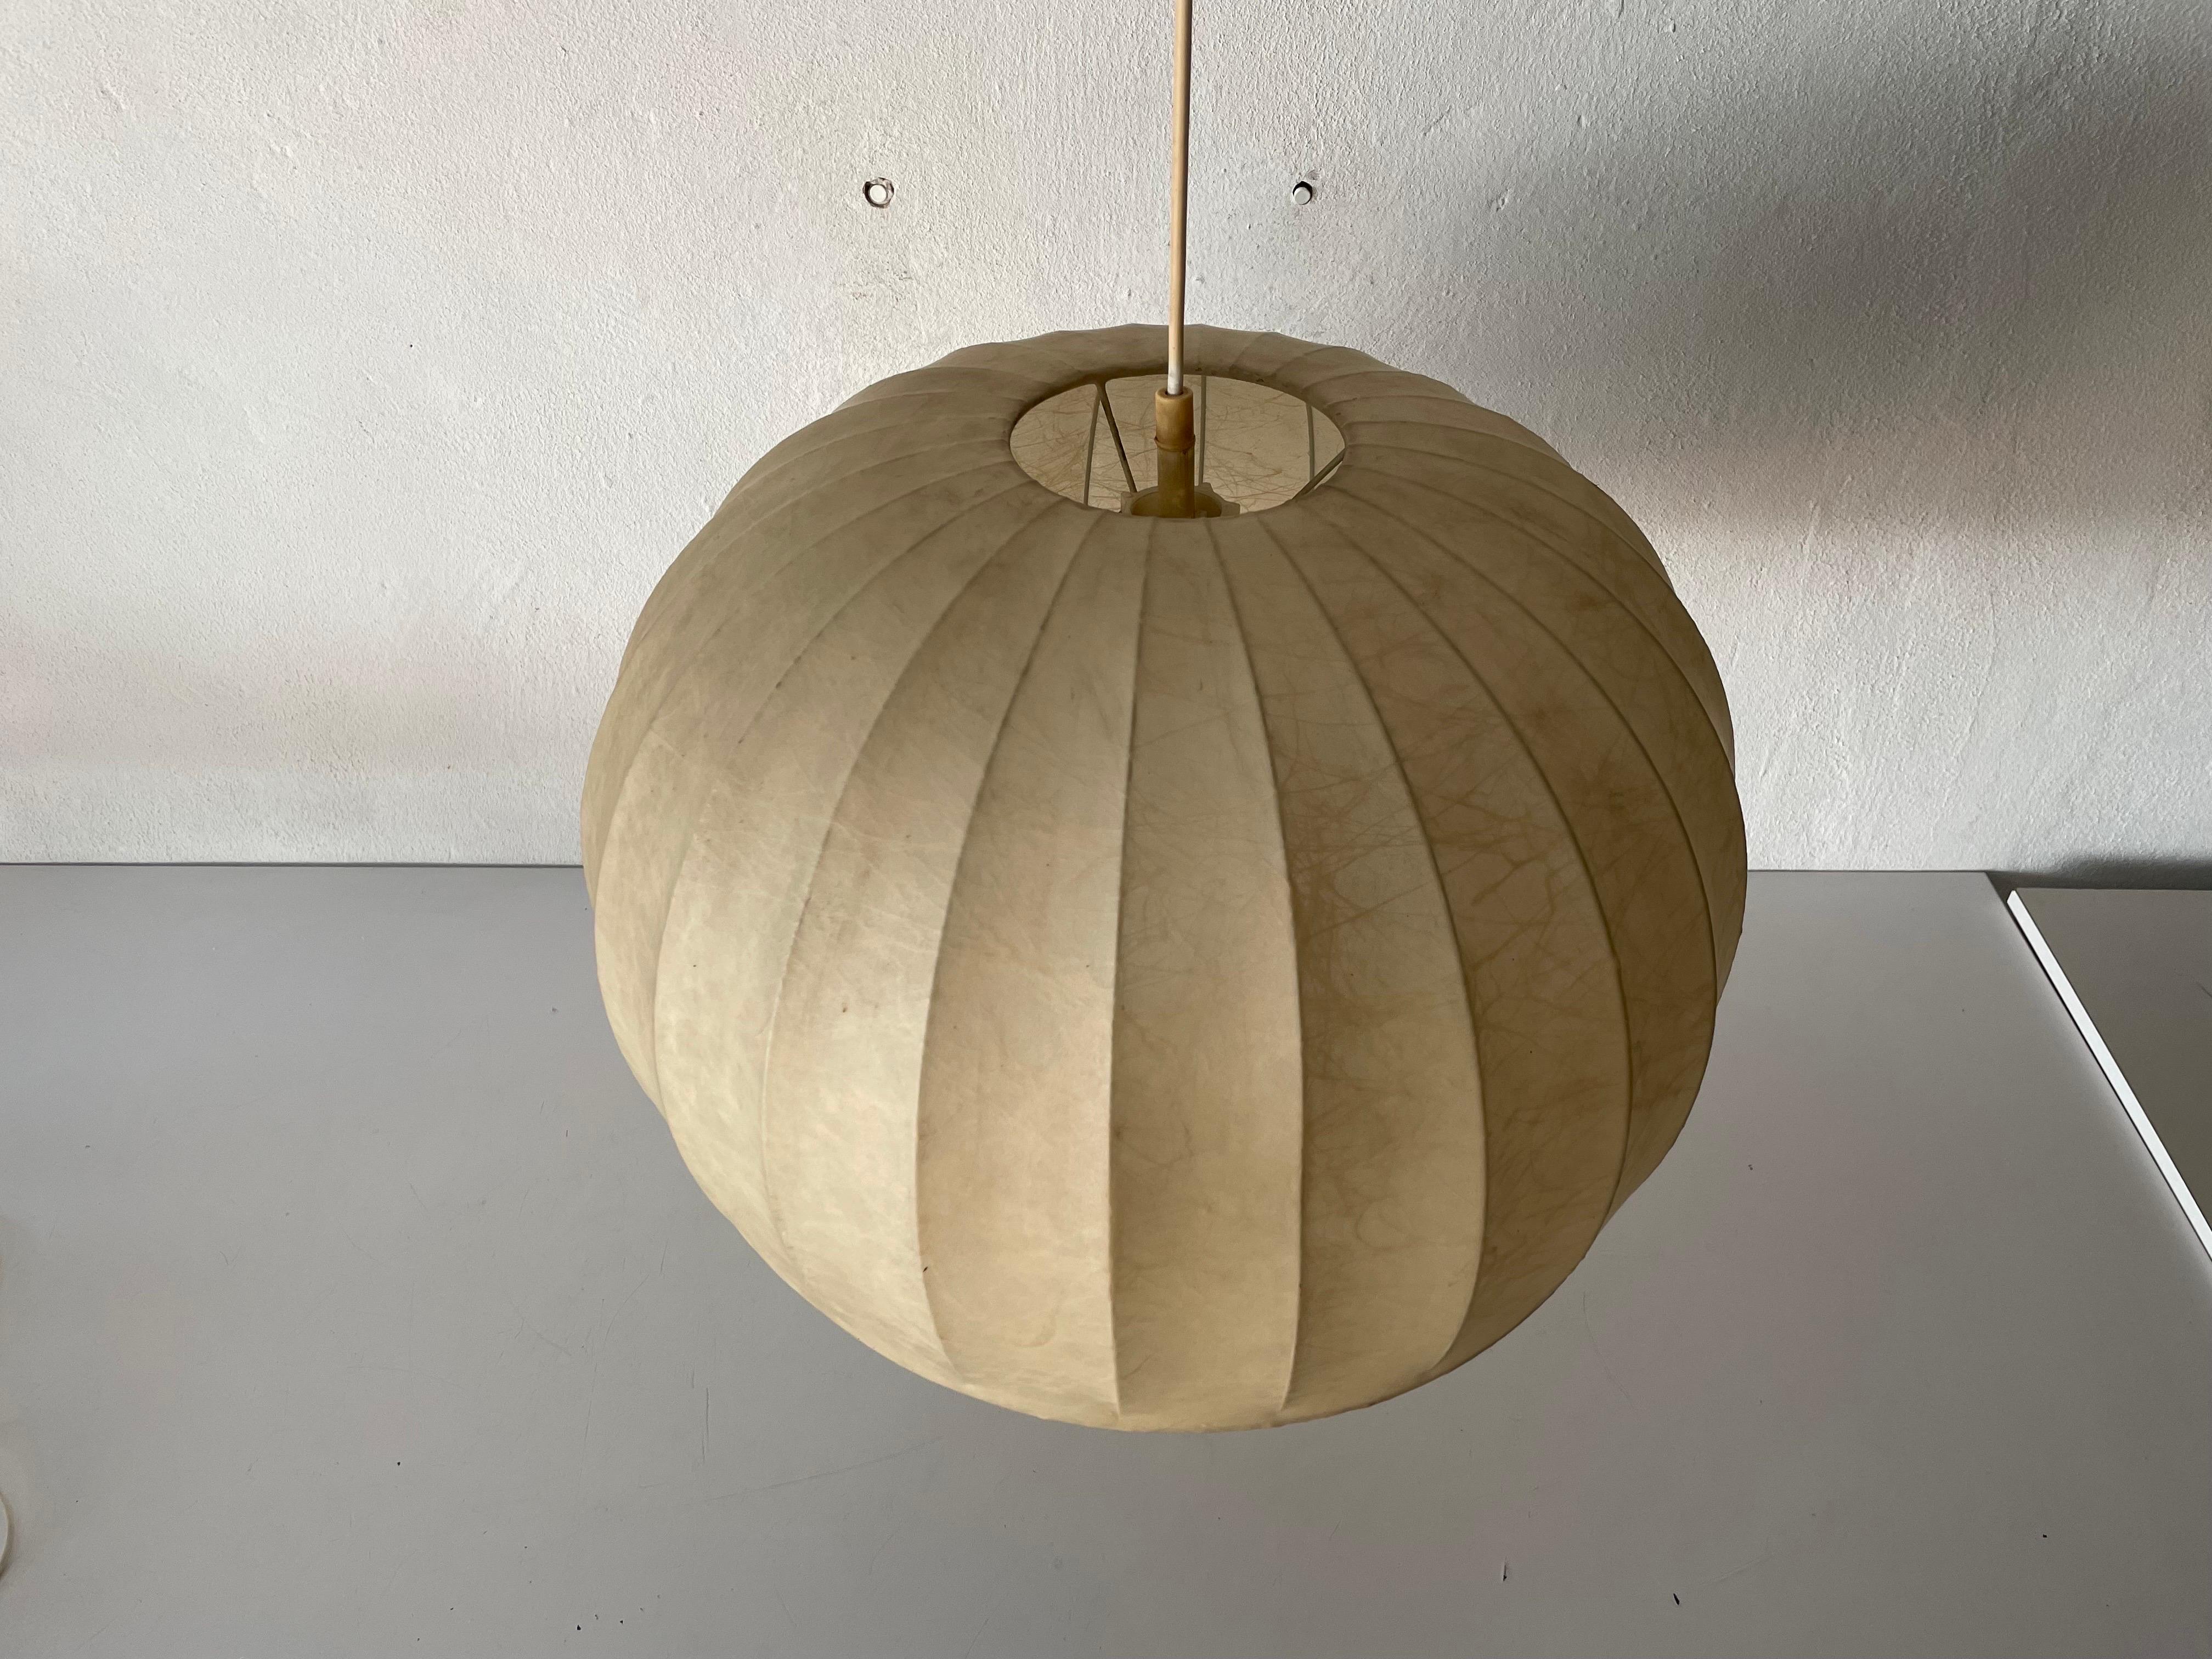 Large Cocoon pendant lamp, 1960s, Italy
 
Lampshade is in very good vintage condition.

This lamp works with E27 light bulb. Max 100W
Wired and suitable to use with 220V and 110V for all countries.

Measurements:
Diameter: 50 cm
Height: 32